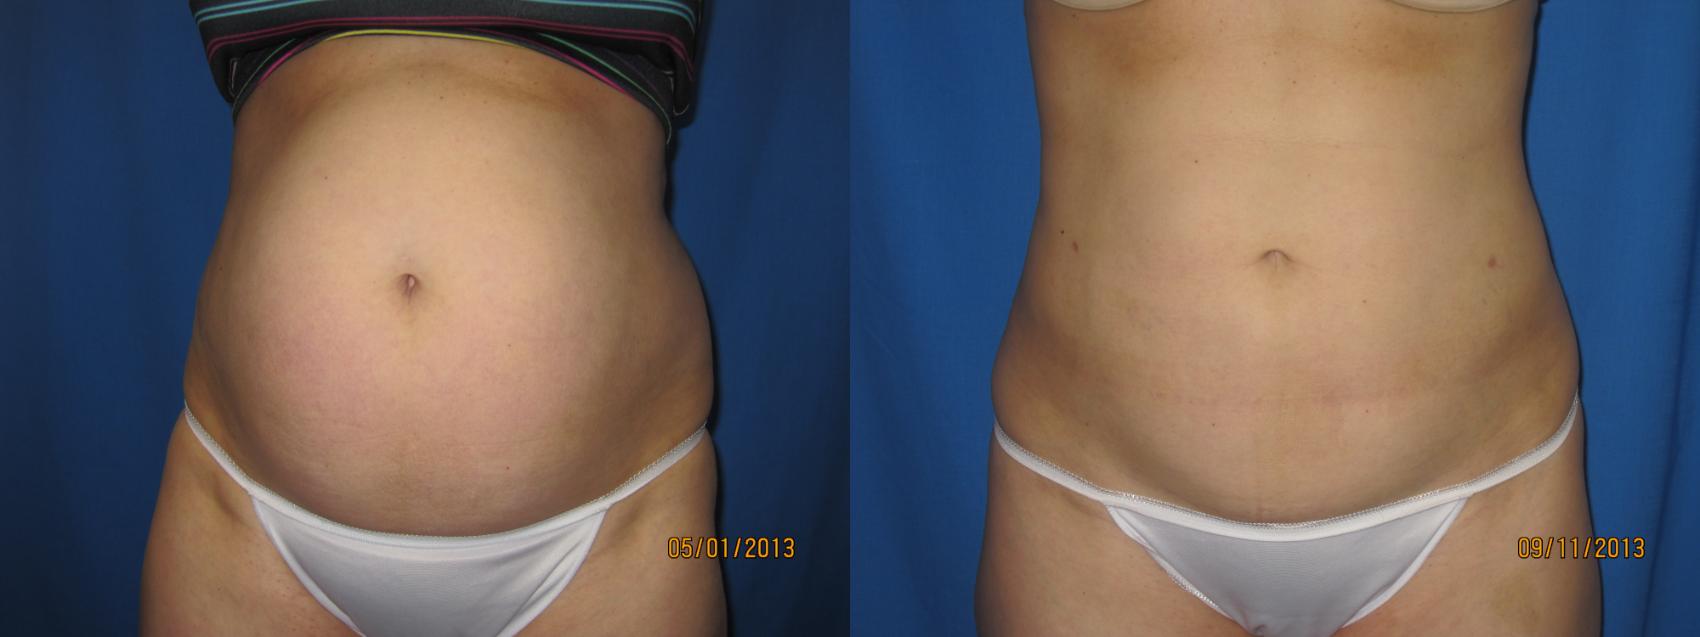 Liposuction Abdomen Flanks Before And After Pictures Case